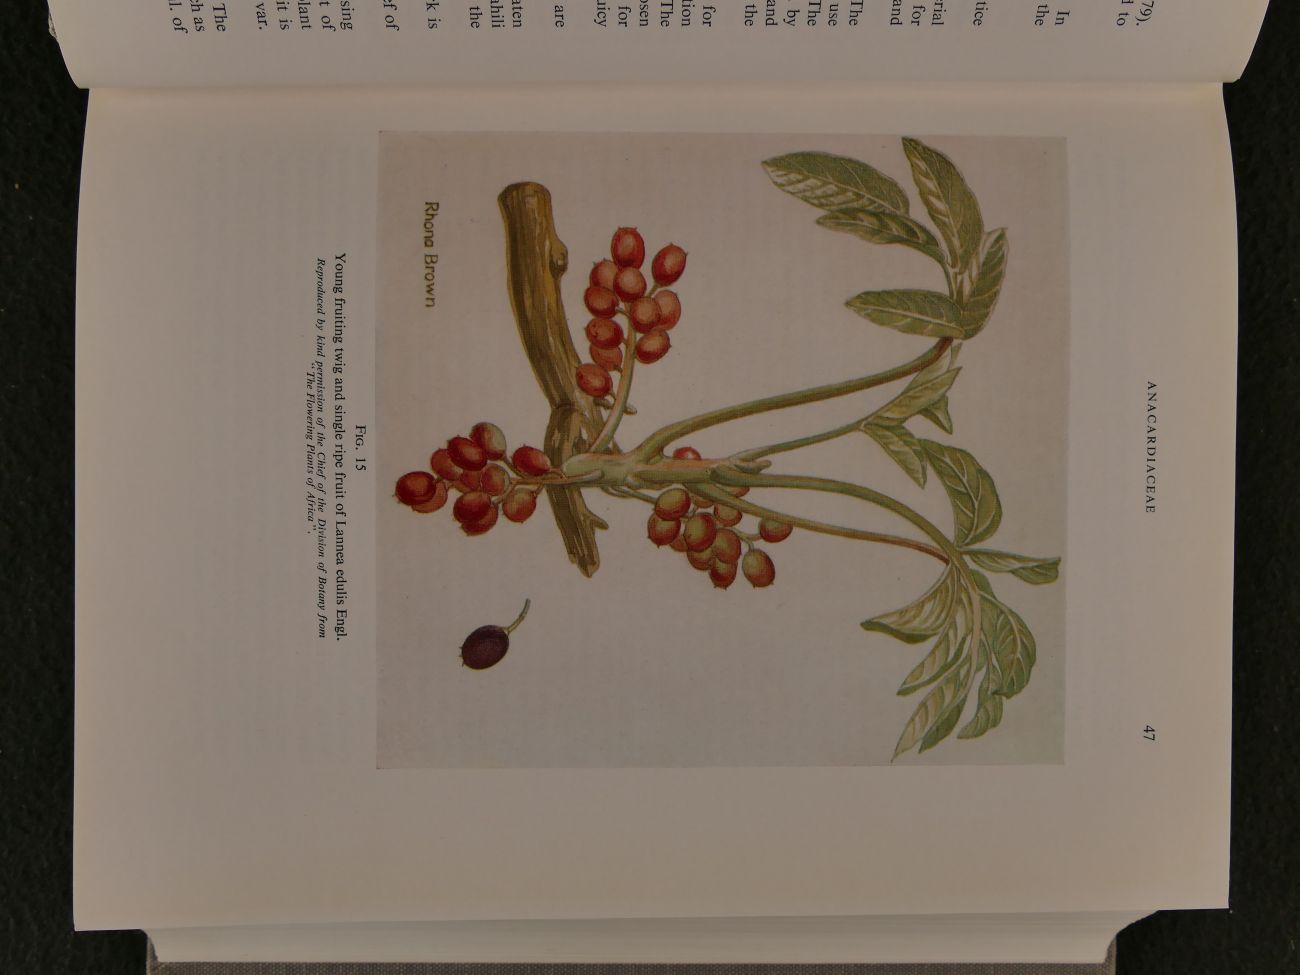 Watt, John Mitchell and Maria Gerdina Breyer-Brandwijk - The medicinal and poisonous plants of southern and eastern Africa: Being An Account Of Their Medicinal And Other Uses, Chemical Composition, Pharmacological Effects And Toxicology In Man And Animal (10 foto's)